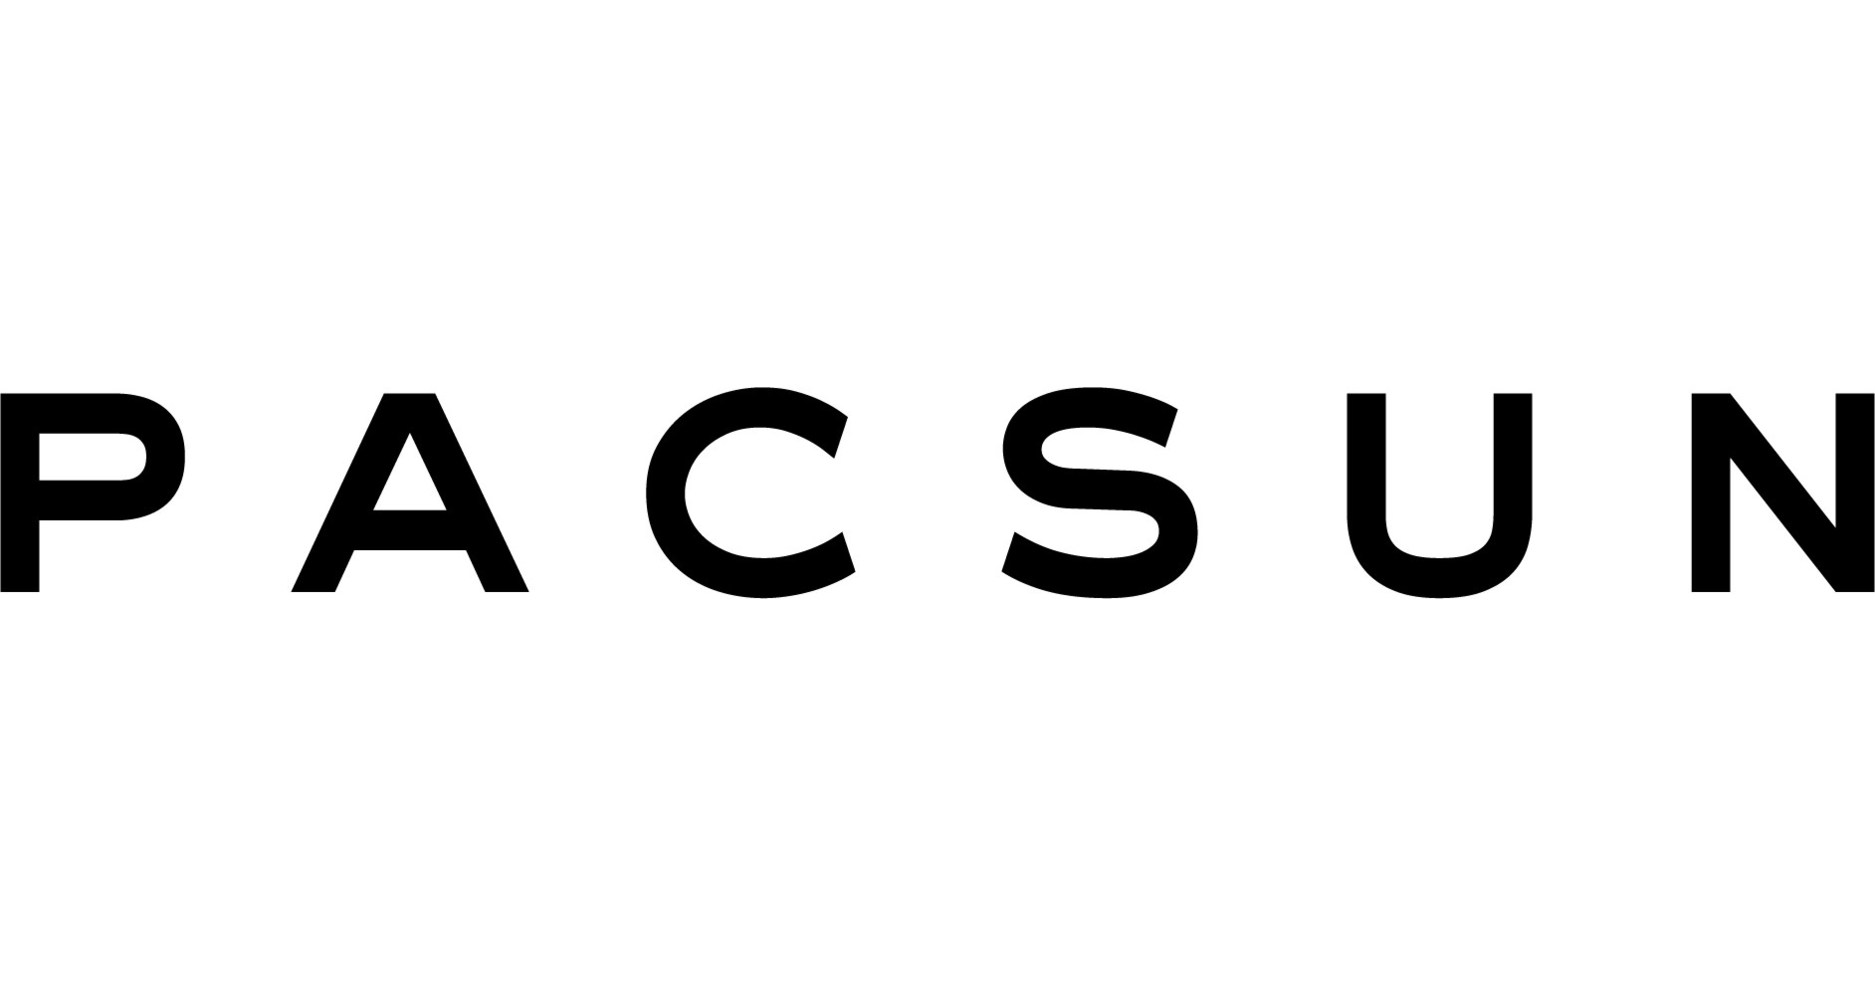 PacSun Back to $900 Million Sales, Focused on Partnerships and